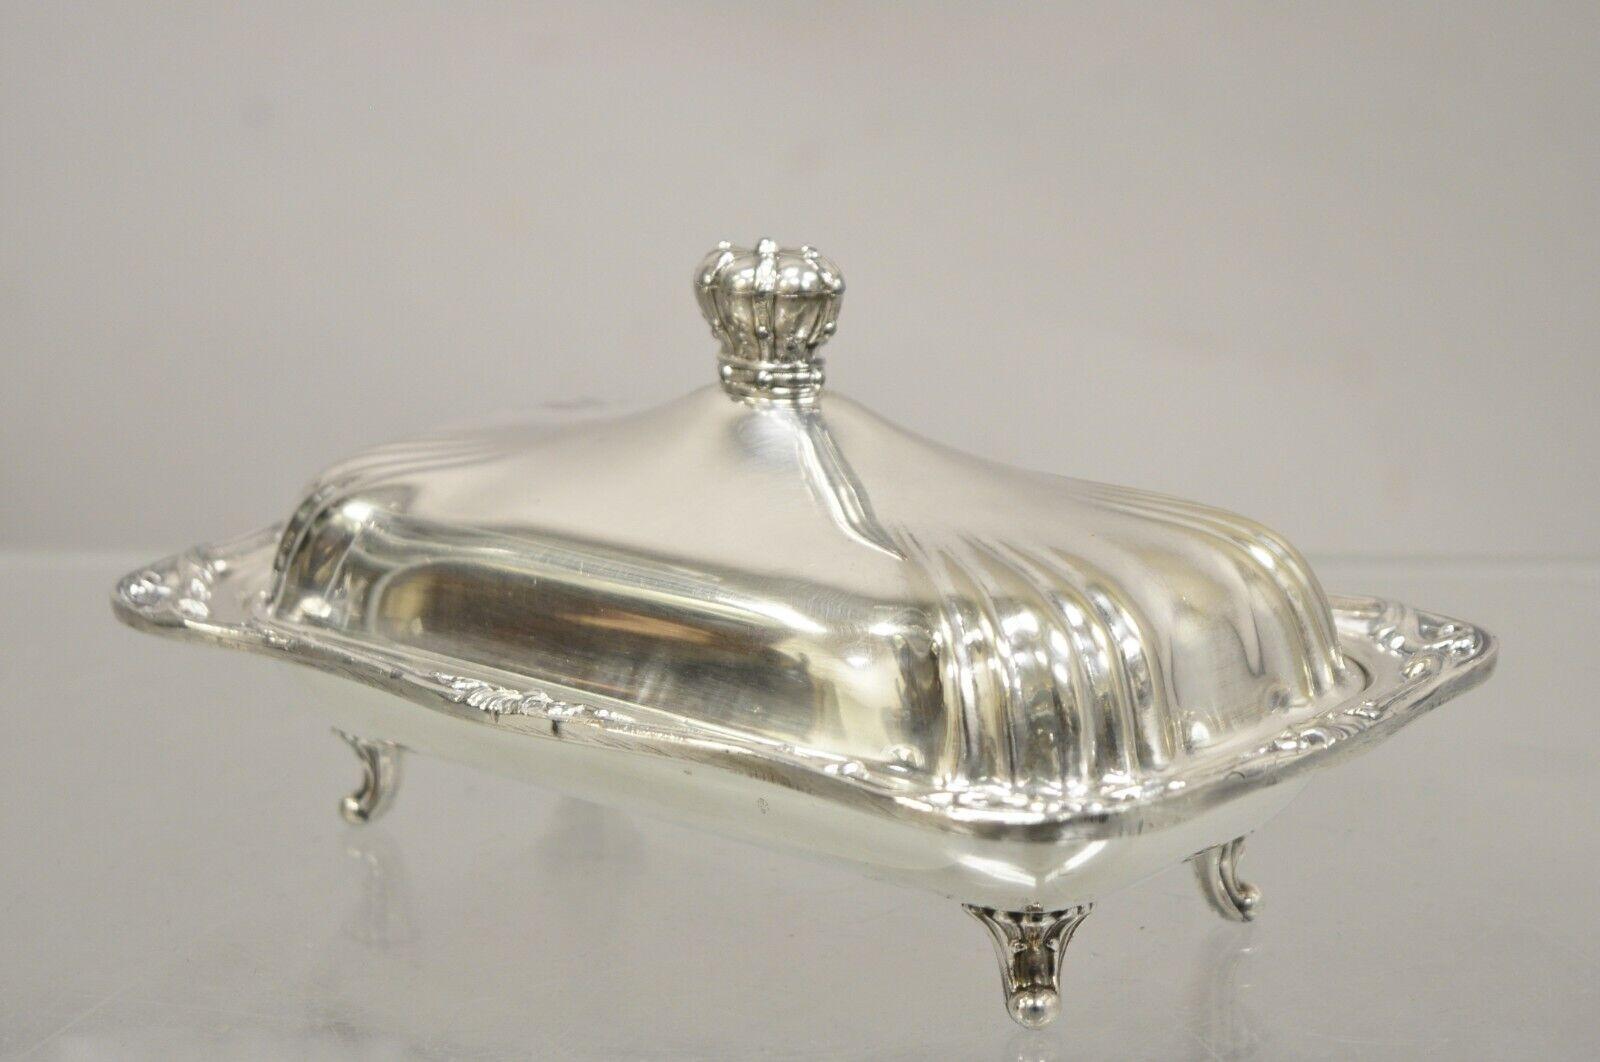 Vintage Coronet Silver Victorian Silver Plated Covered Butter Dish with Royal Crown Handle. Circa Mid 20th Century. Measurements: 4